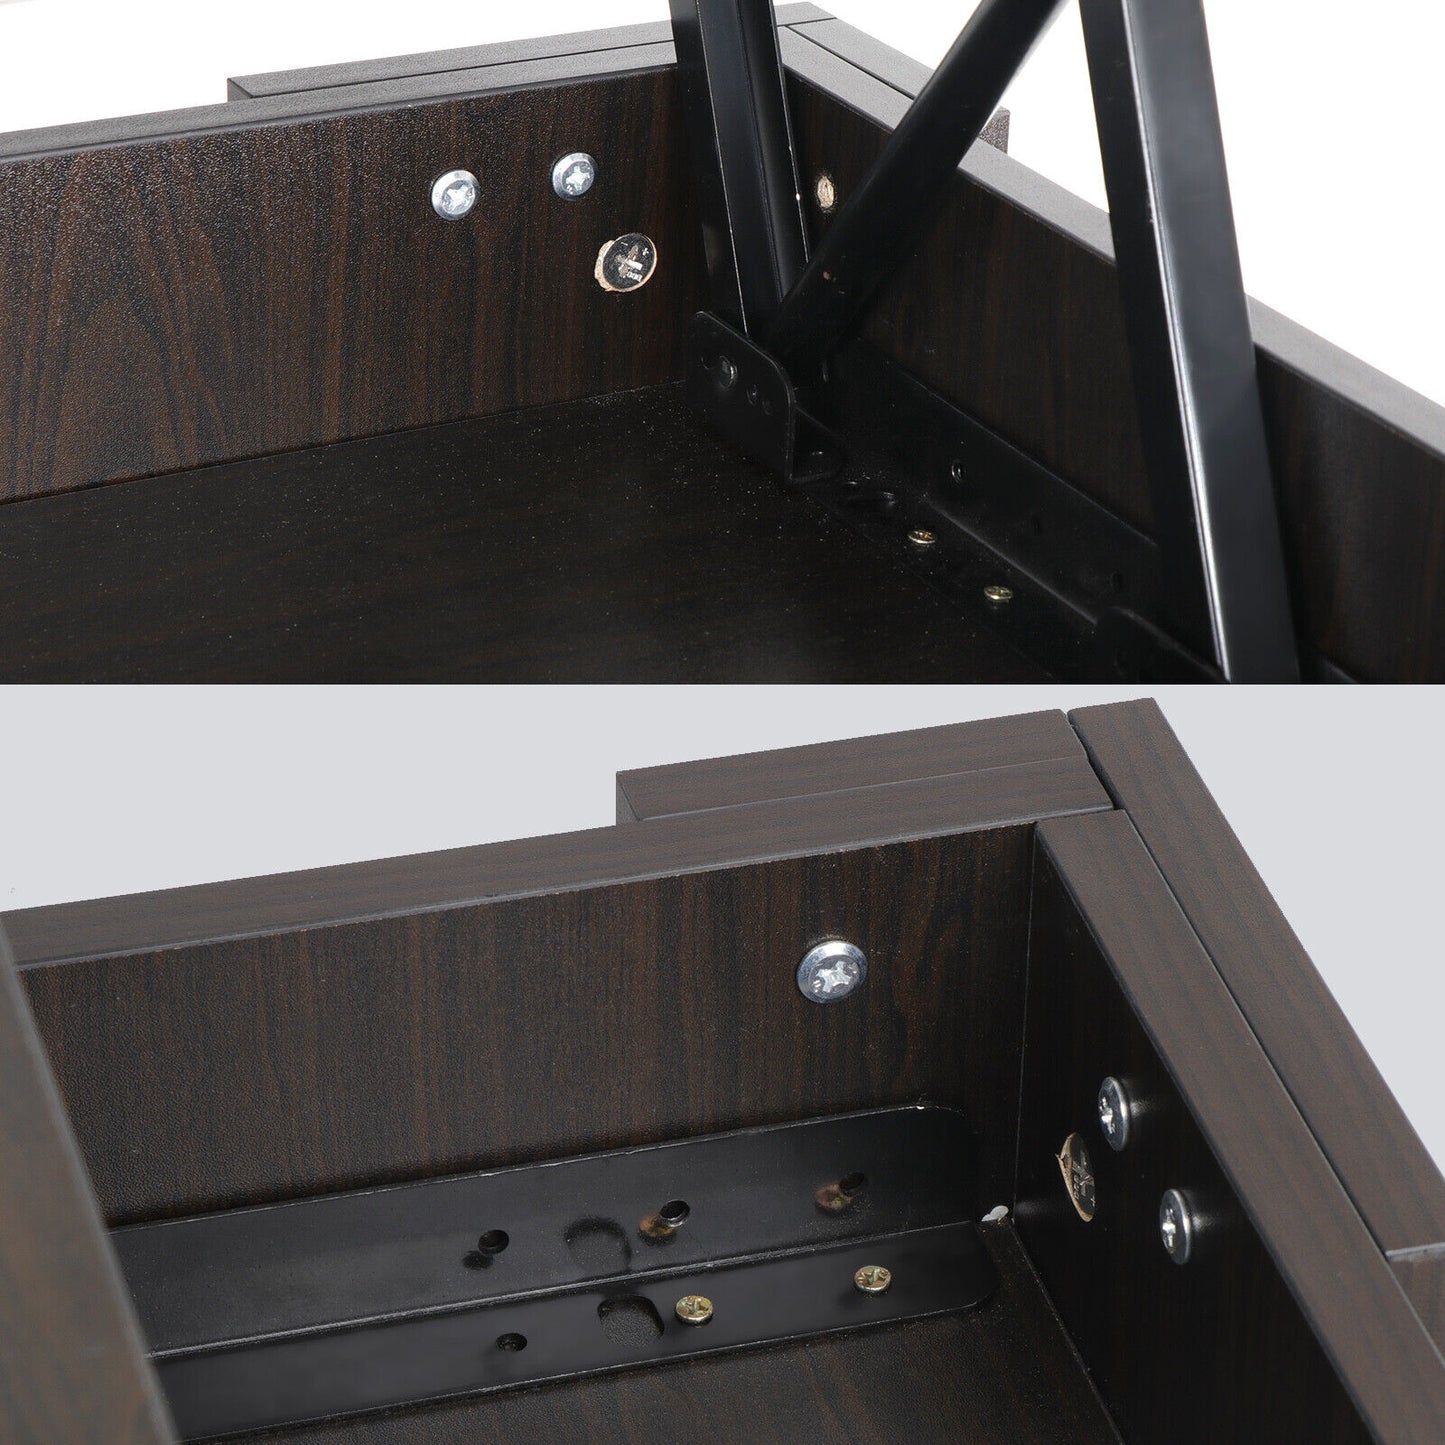 Lift Top Coffee Table w/Hidden Compartment Storage Shelves Cocktail Table Brown